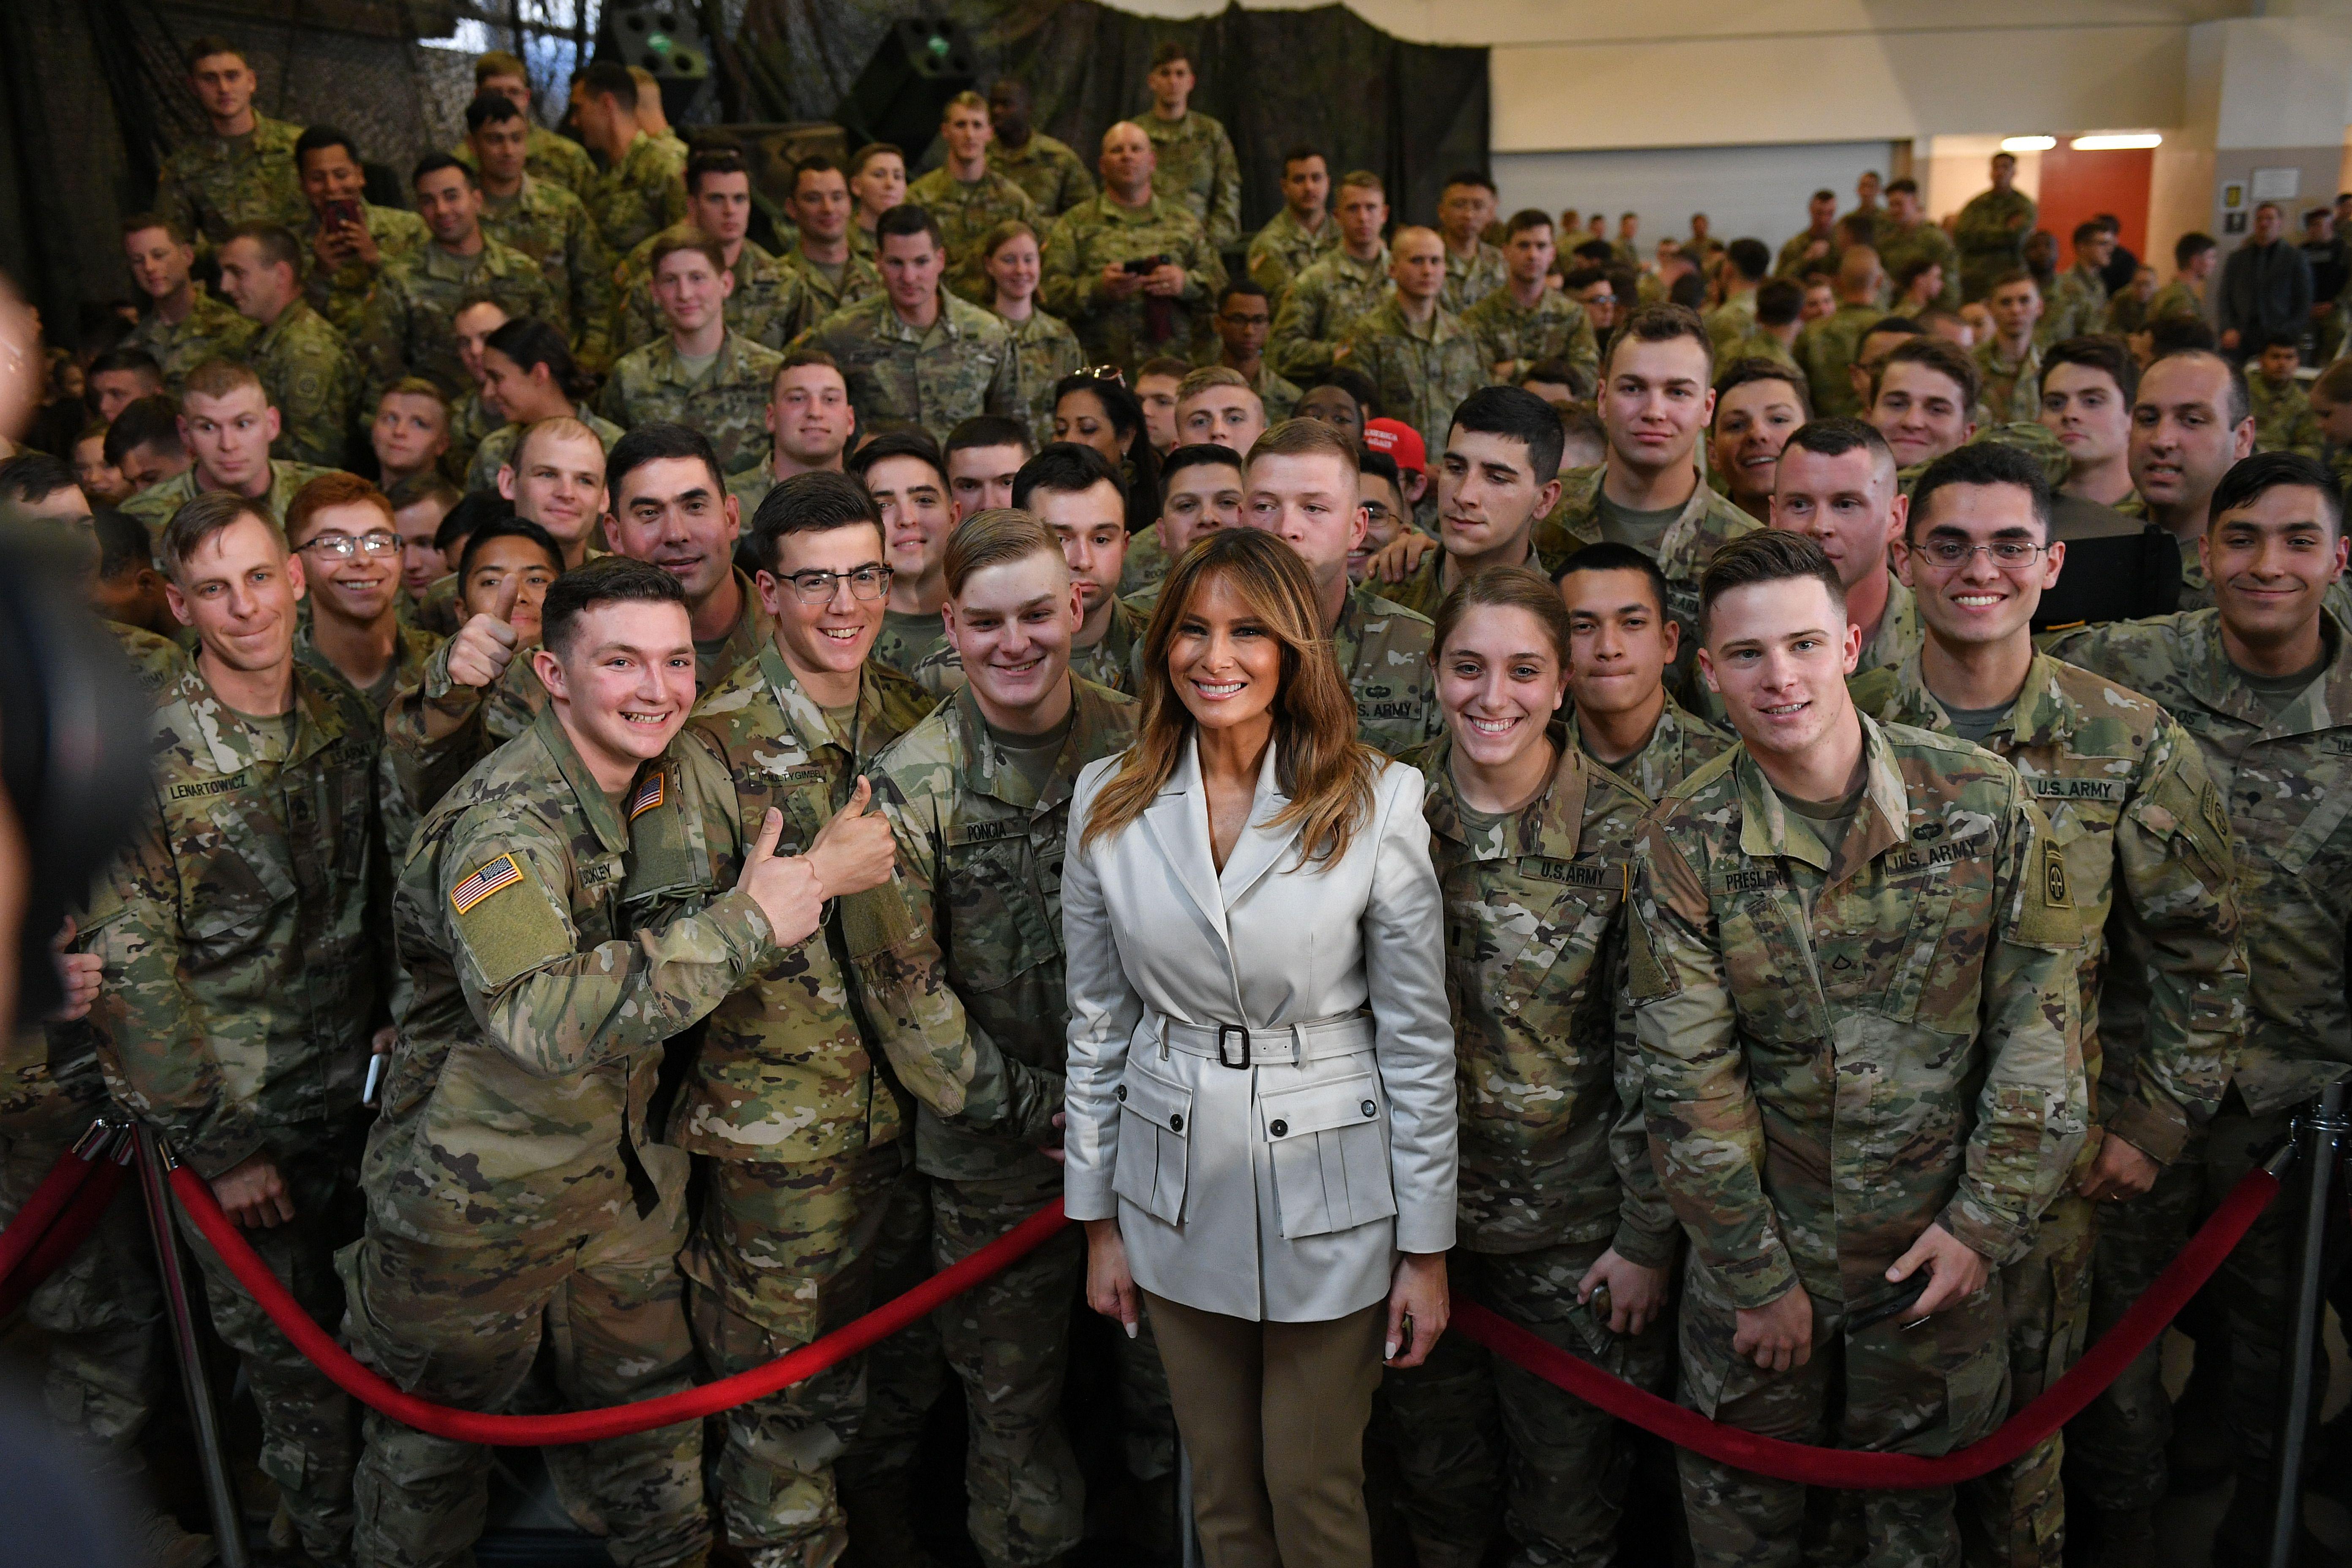 Melania Trump stands in front of a red velvet rope, behind which is a large group of people in camouflage military uniforms. Melania wears a belted taupe jacket with lapels and two cargo pockets, and slim olive green pants.